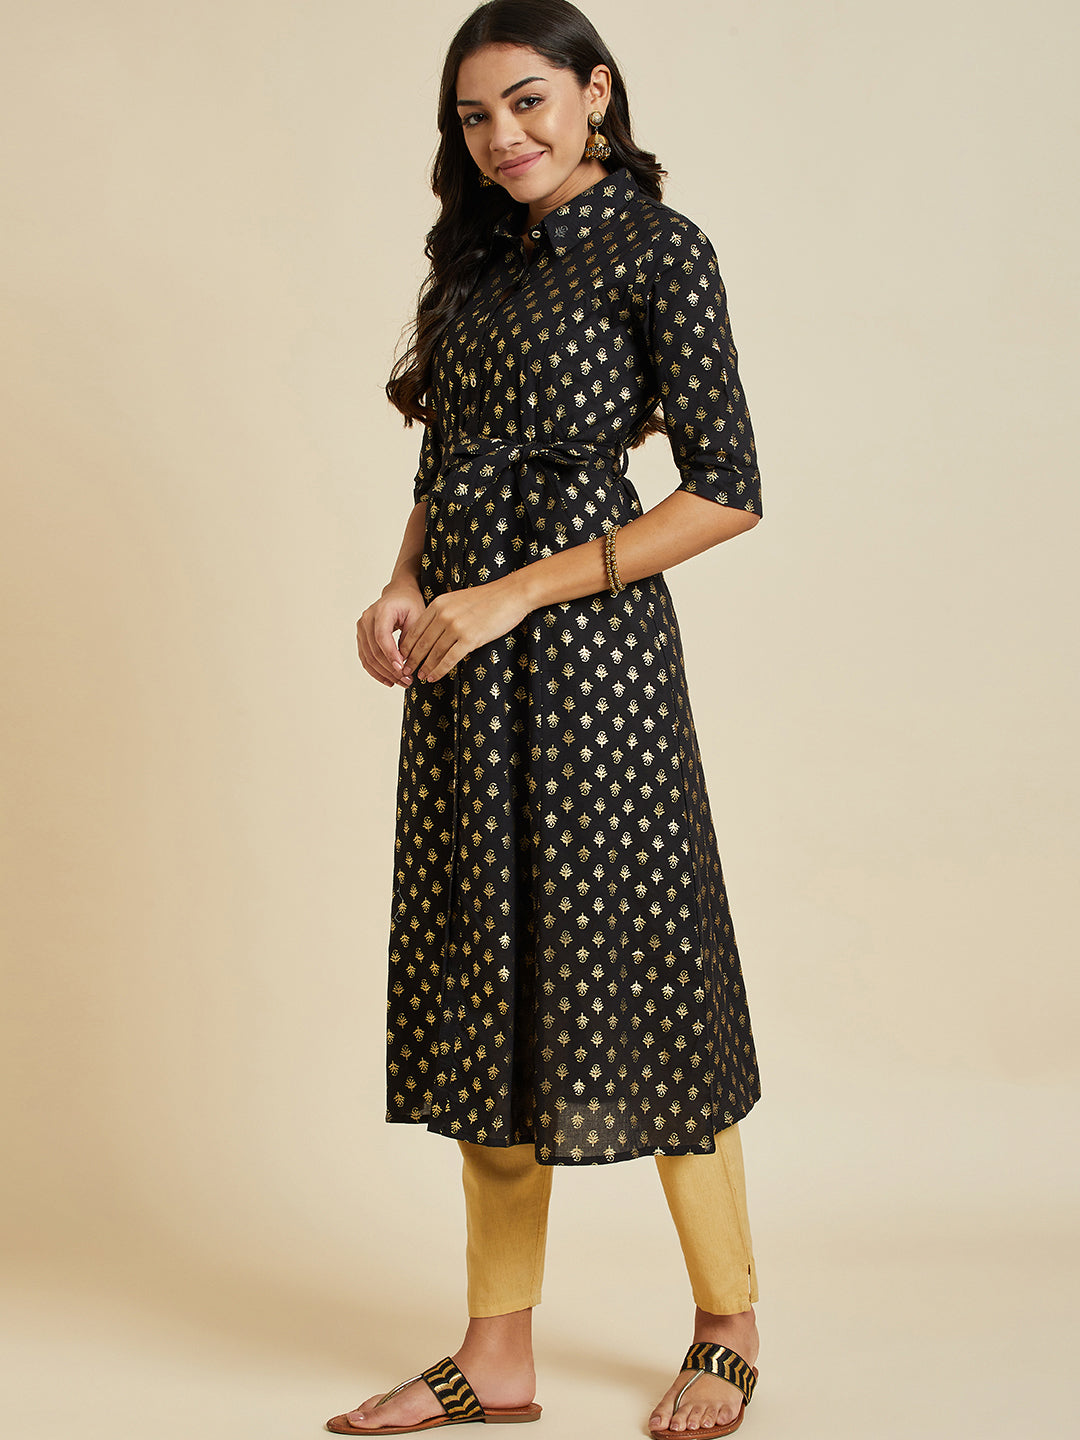 Black A-Line Kurti with Printed Front Pattern – Drida